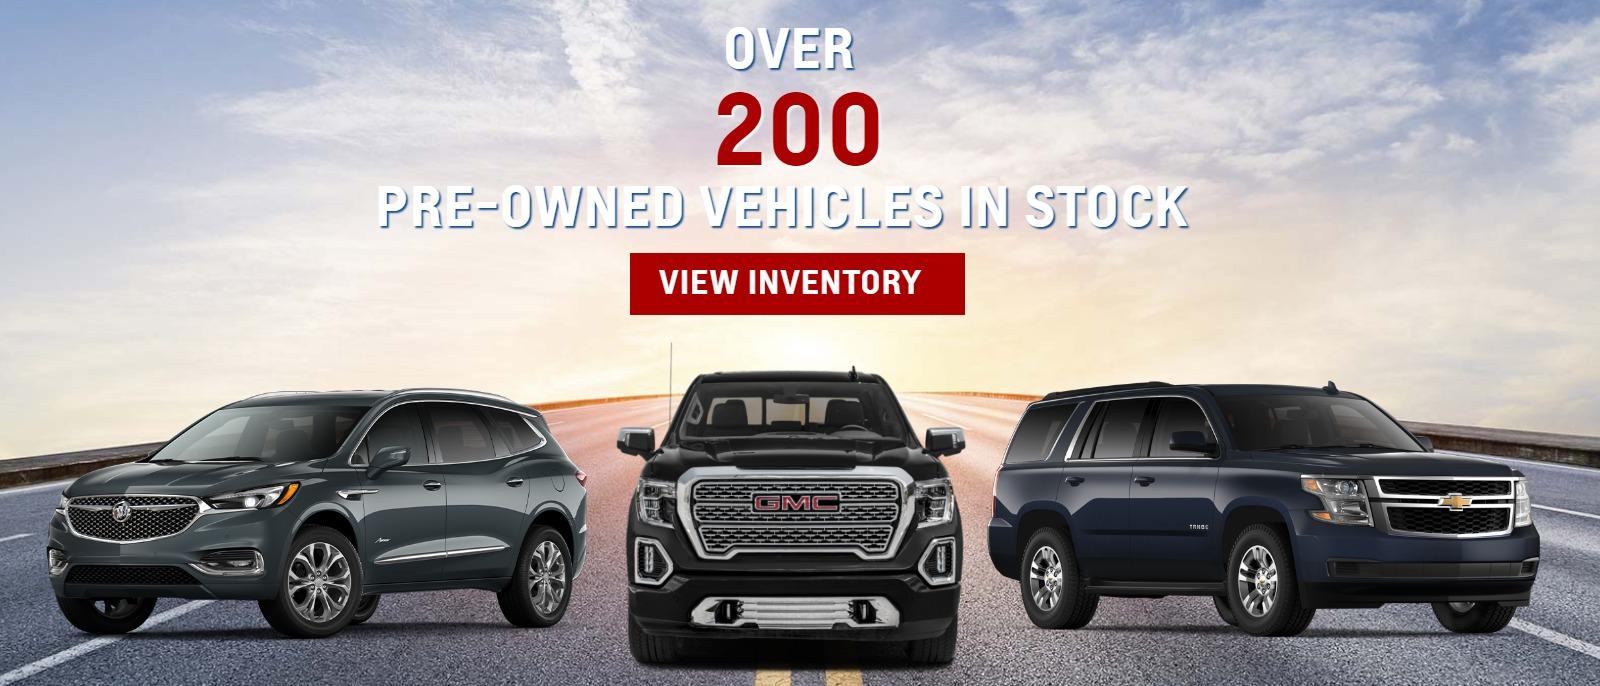 Over 1500 pre-owned vehicles in stock